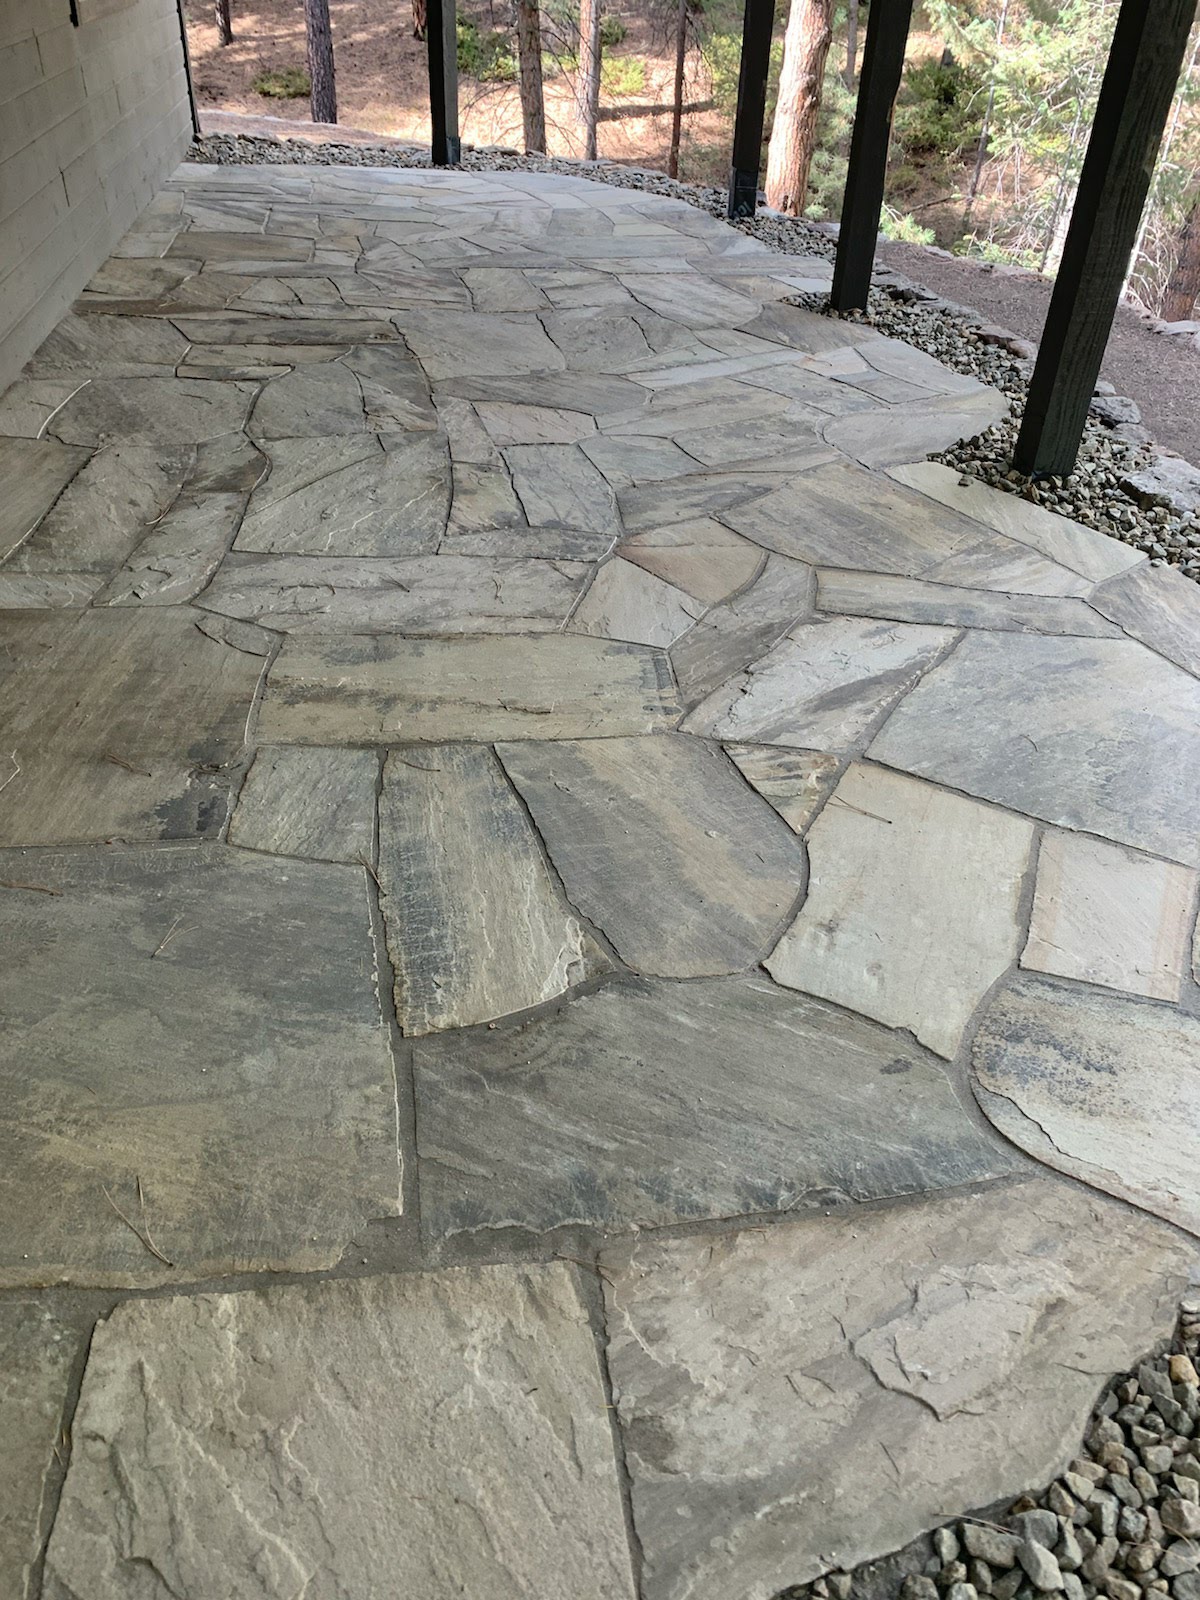 Finished patio made of gray flagstone